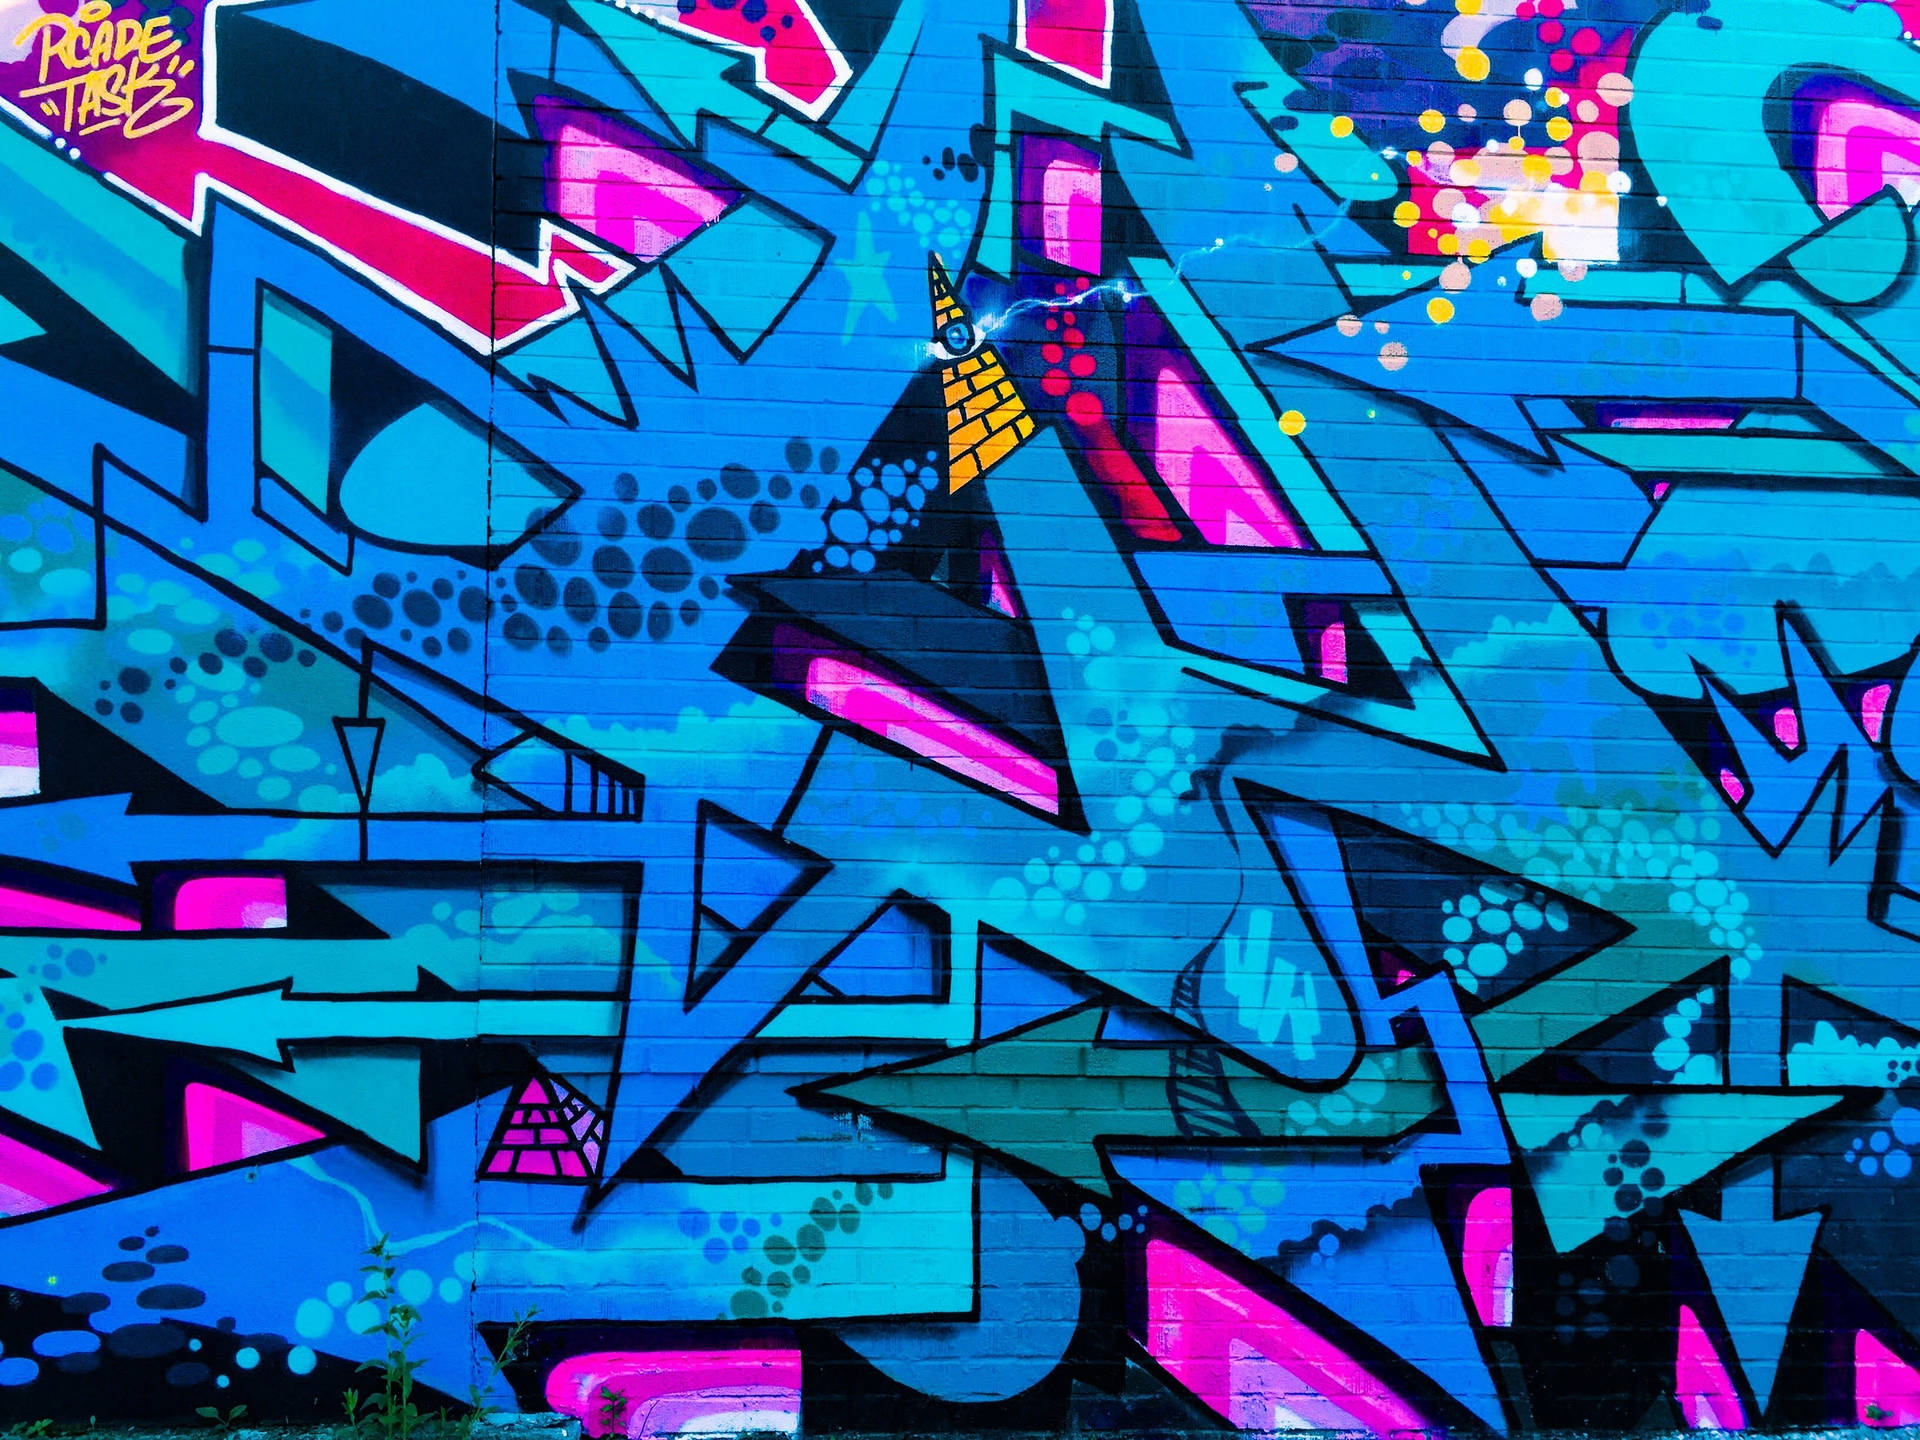 Wallpaper of blue and pink combination graffiti artwork on street wall.